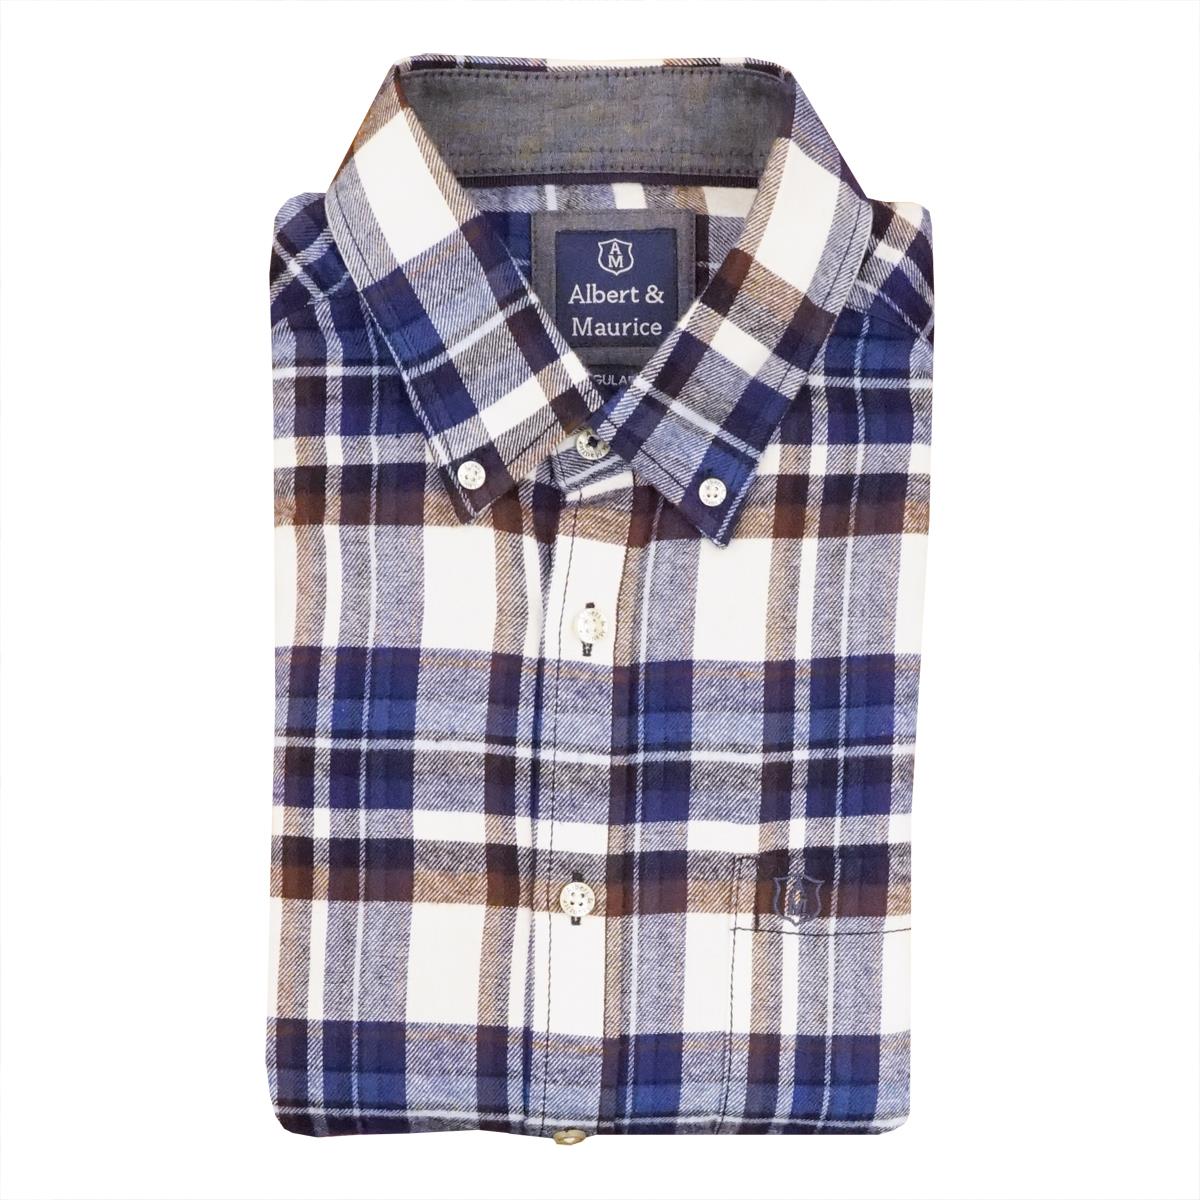 Does brushed cotton mean the Checkley shirt has a soft feel to it?